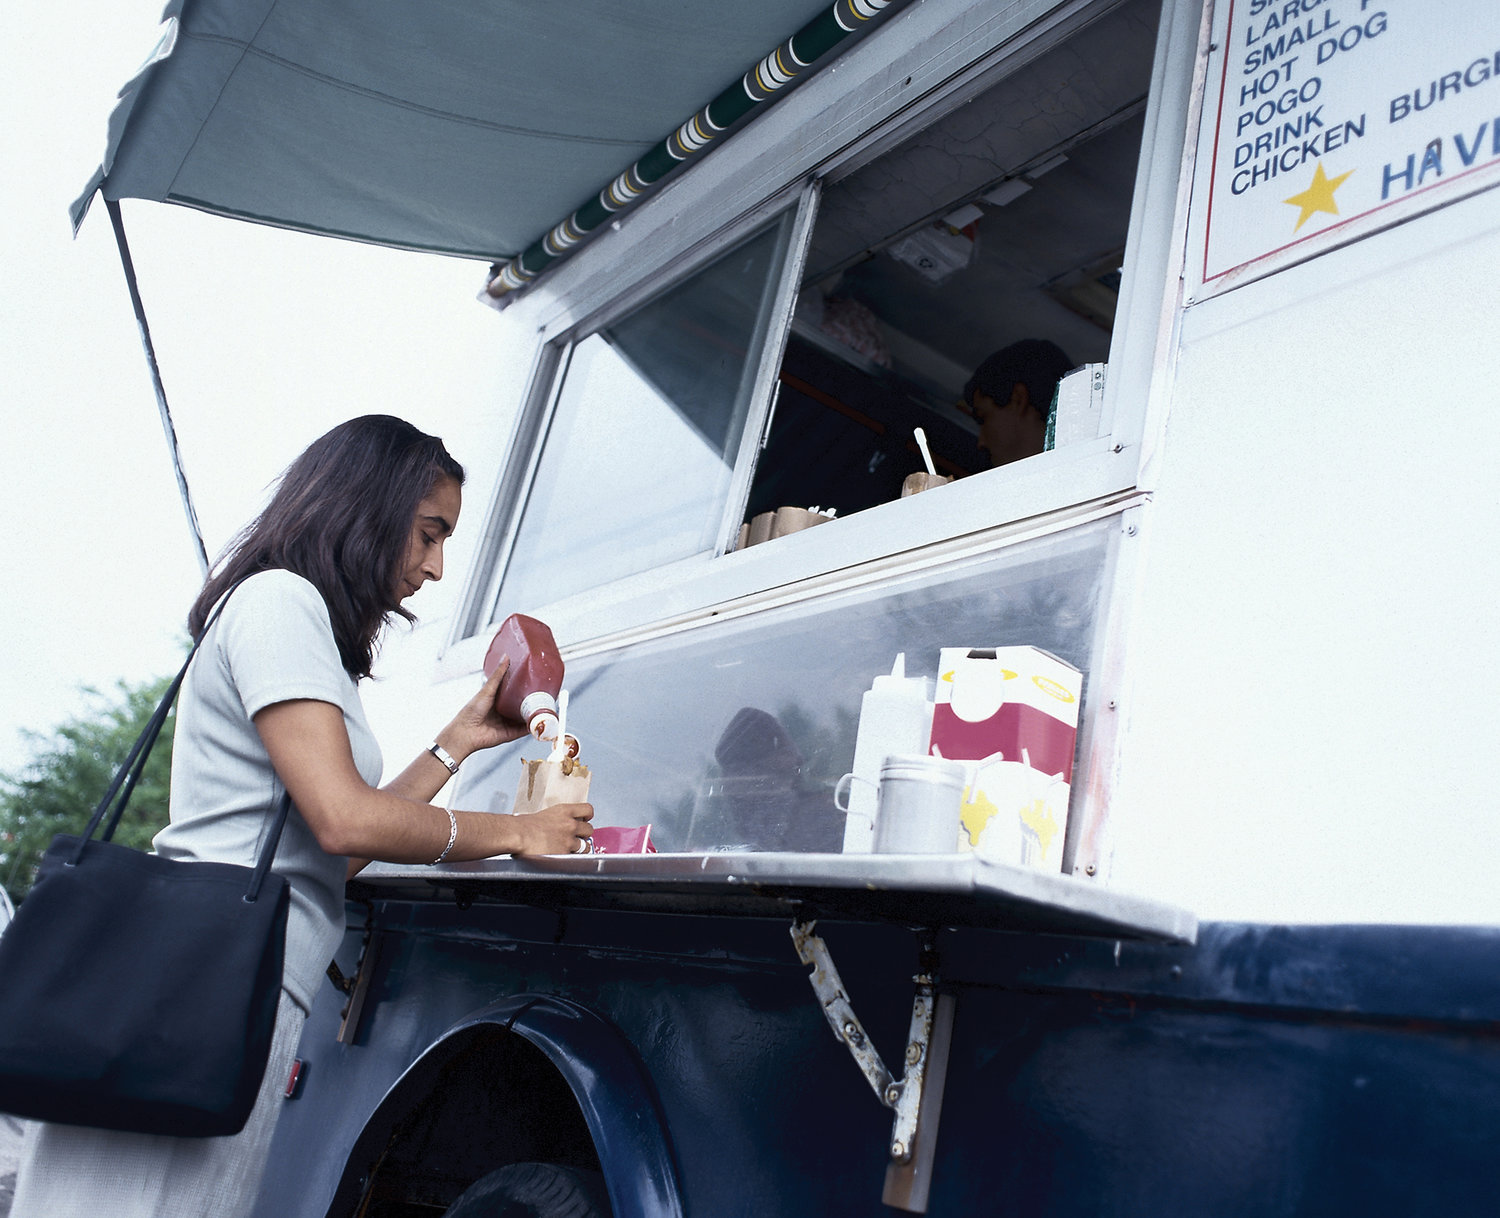 Sparta officials have reduced food truck permit fees, hoping to bring in more vendors within the city limits.